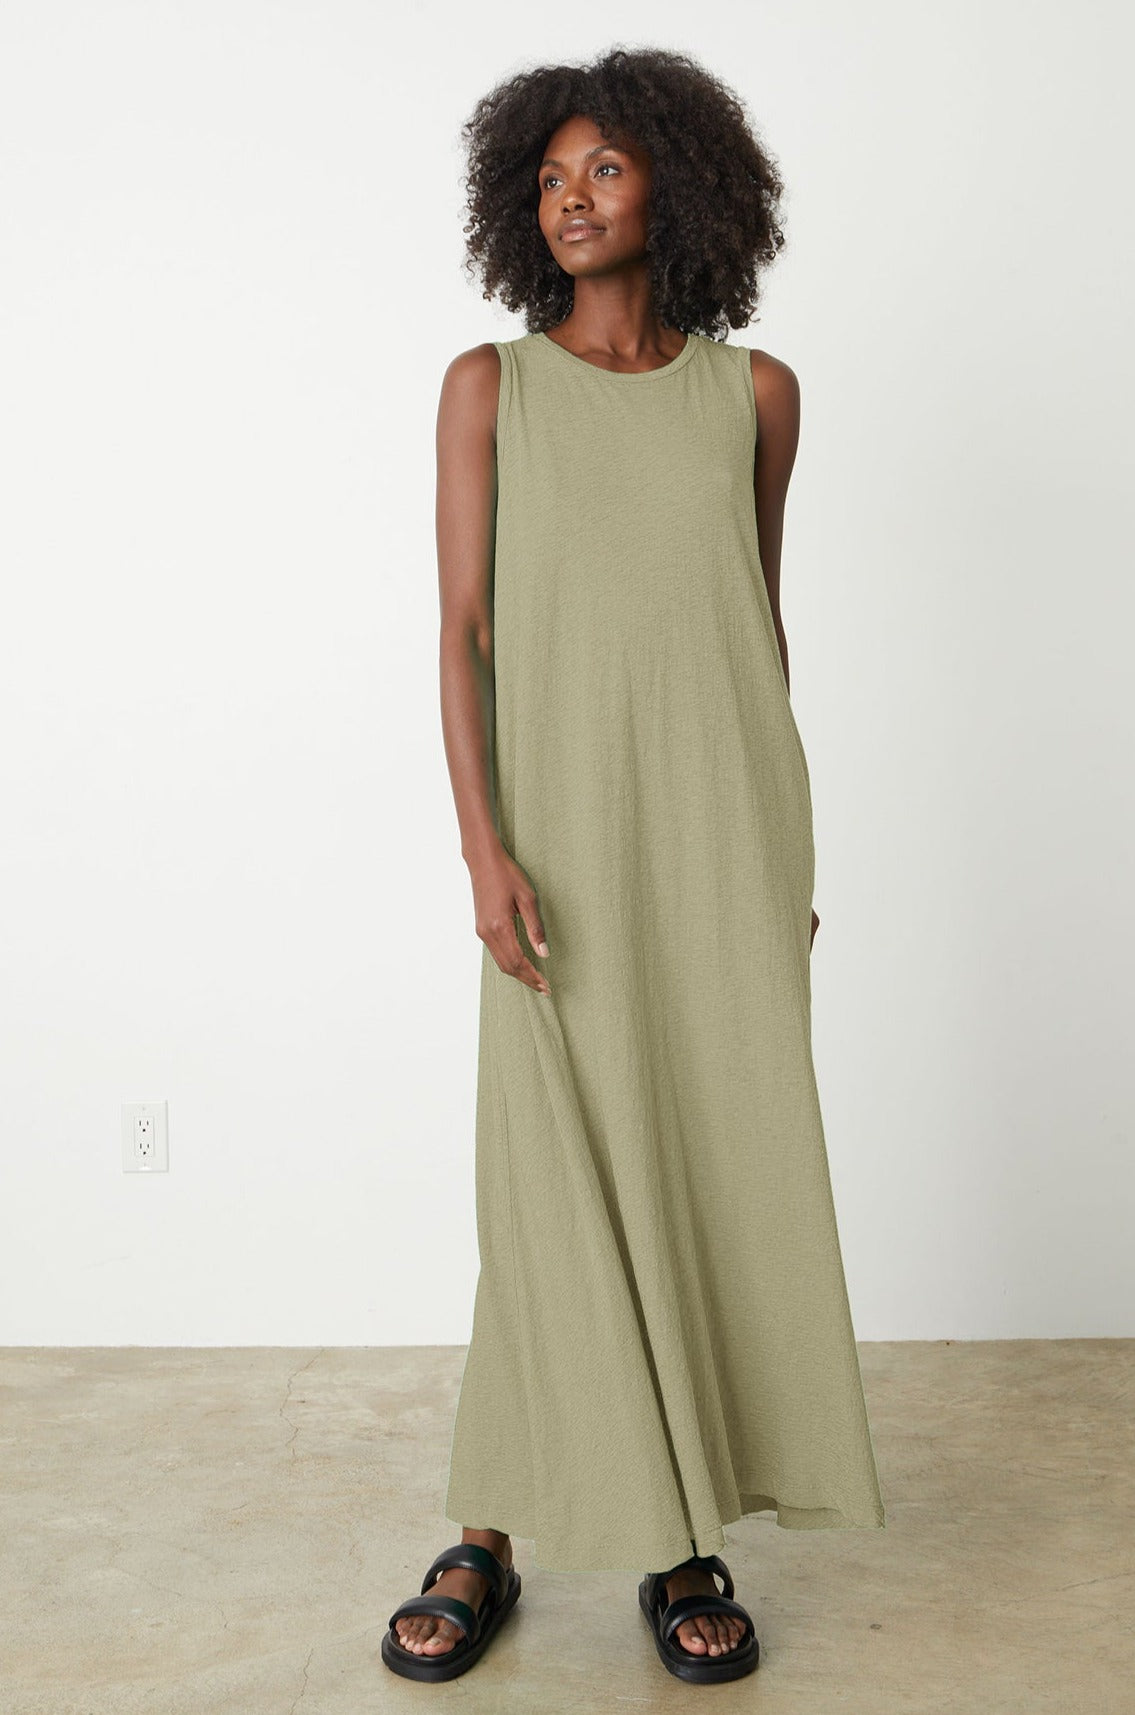   The EDITH sleeveless maxi dress in sage green by Velvet by Graham & Spencer. 